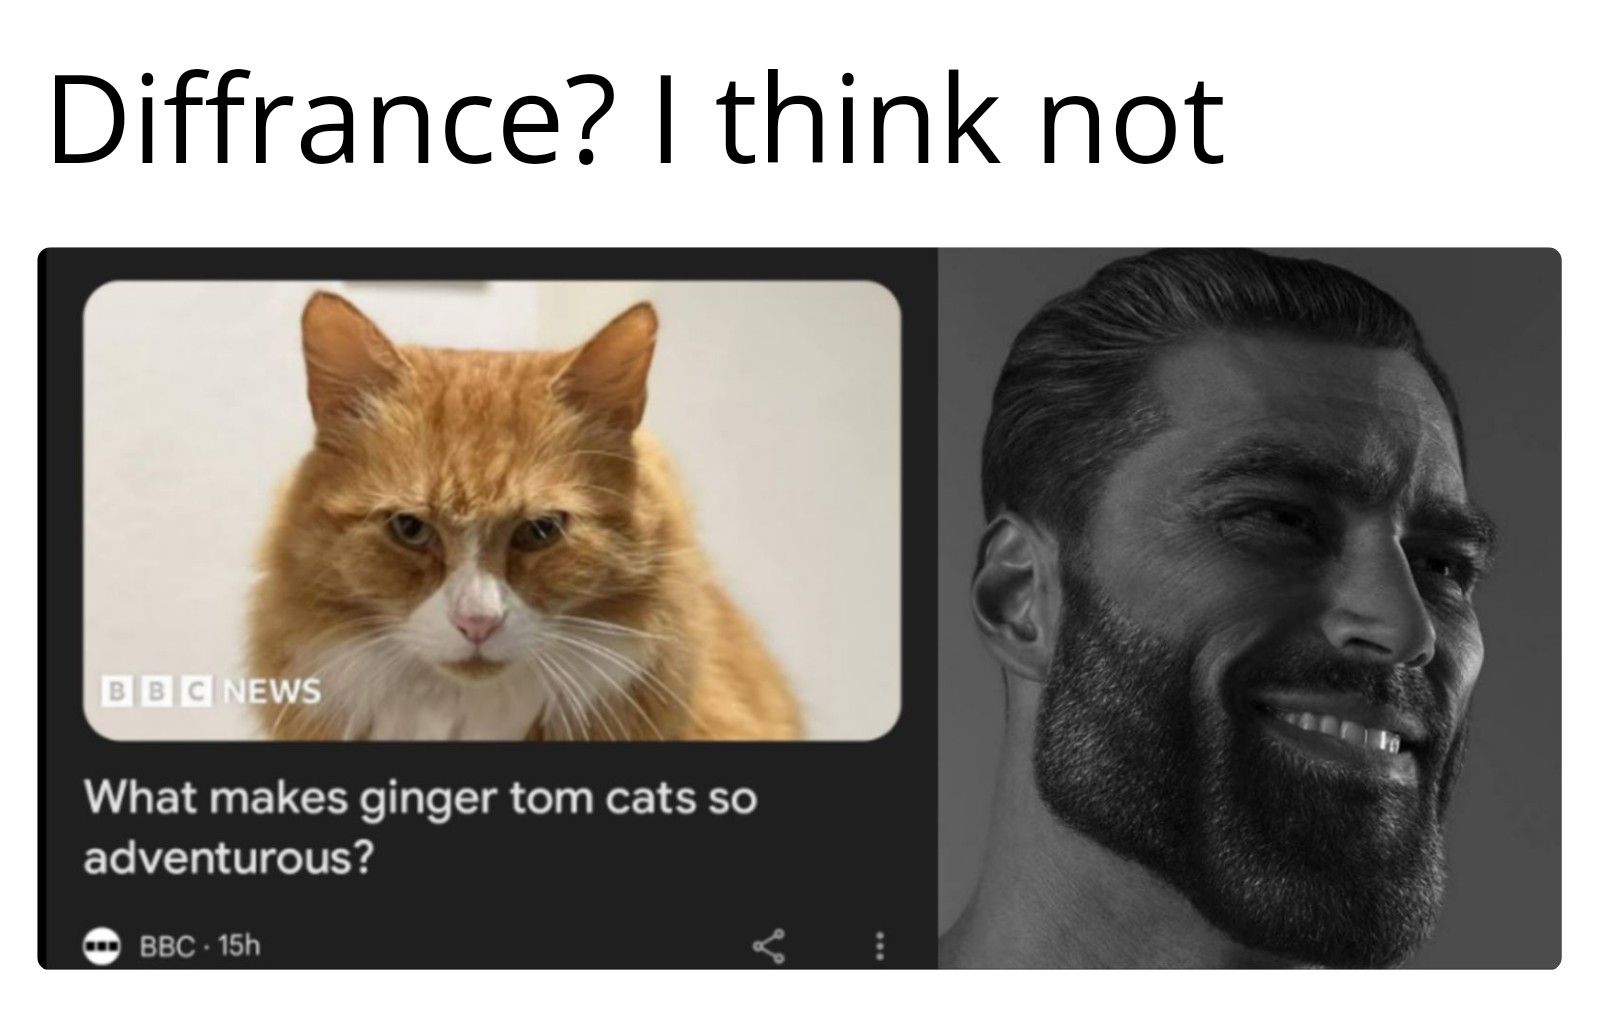 Diffrance? I think not
BBC NEWS
What makes ginger tom cats so
adventurous?
BBC-15h